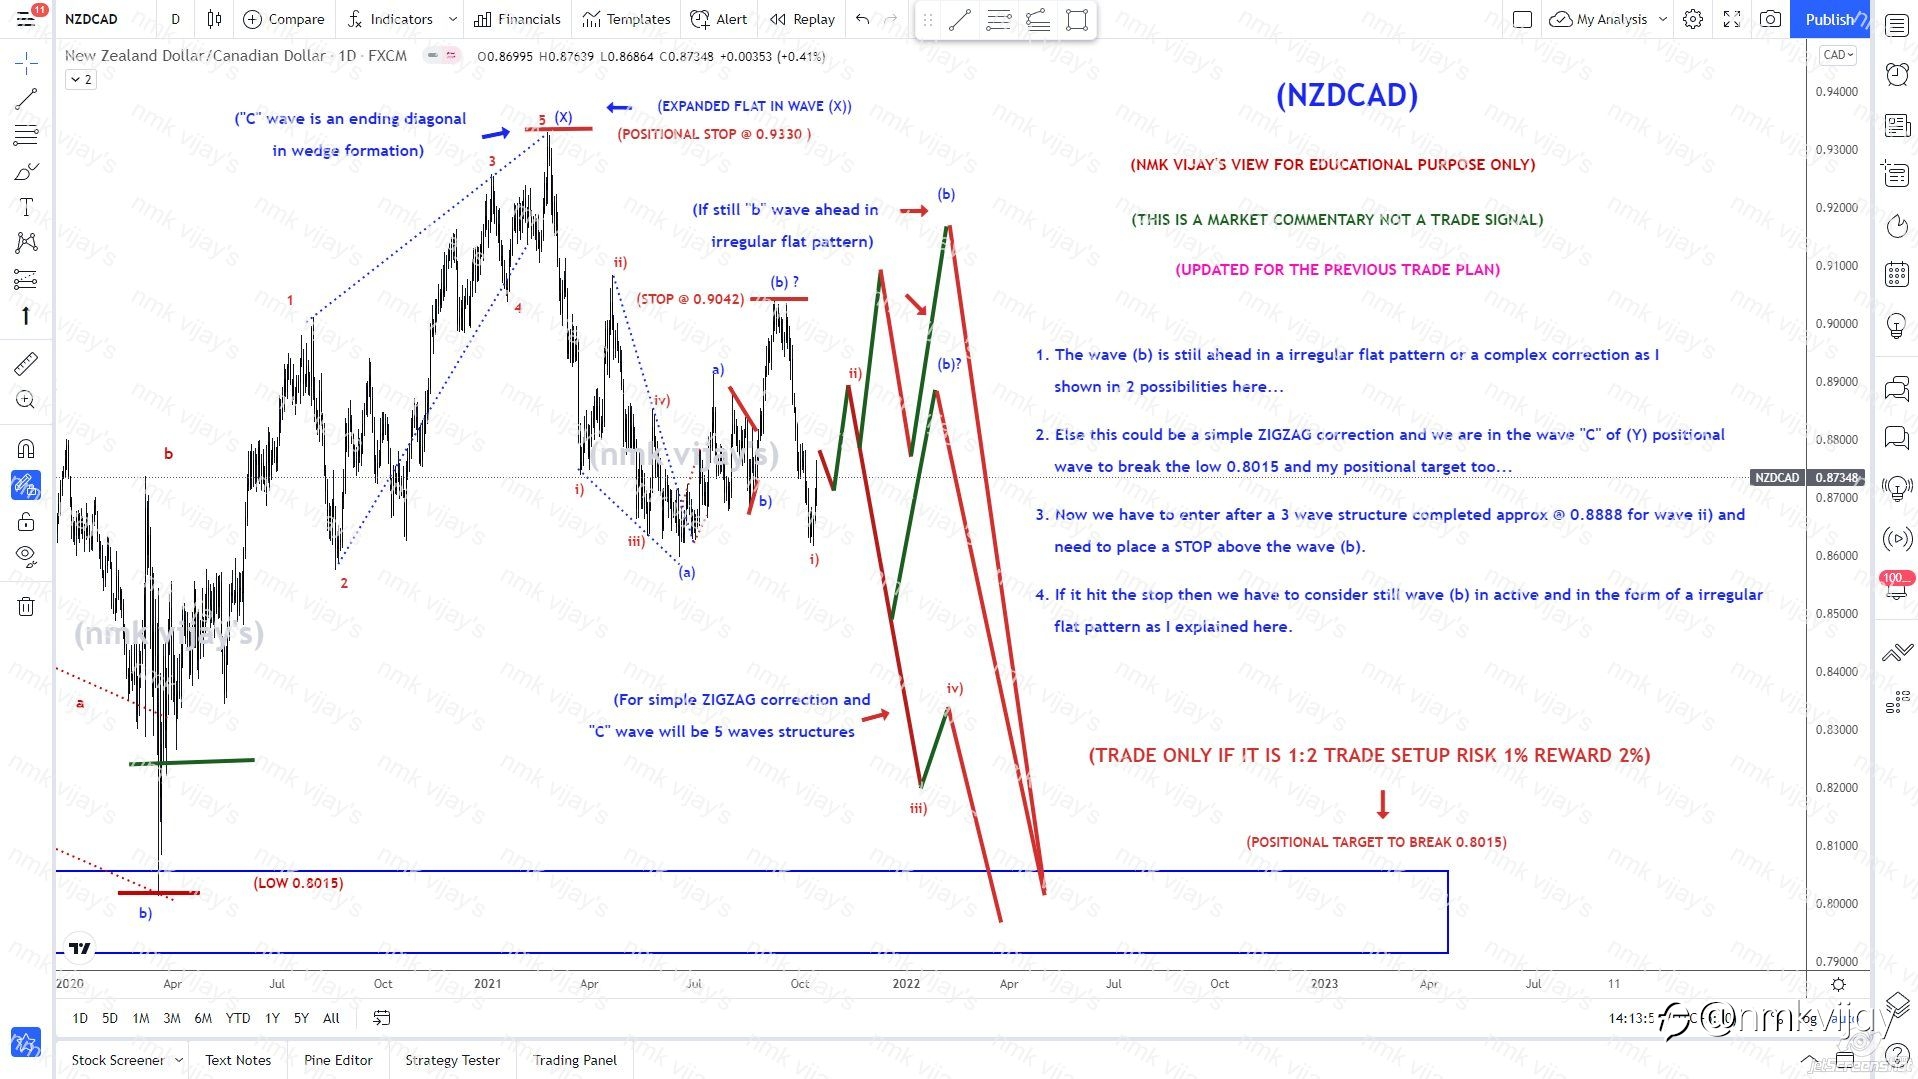 NZDCAD-We are in wave C to 0.8015 to break or still in (b) ?